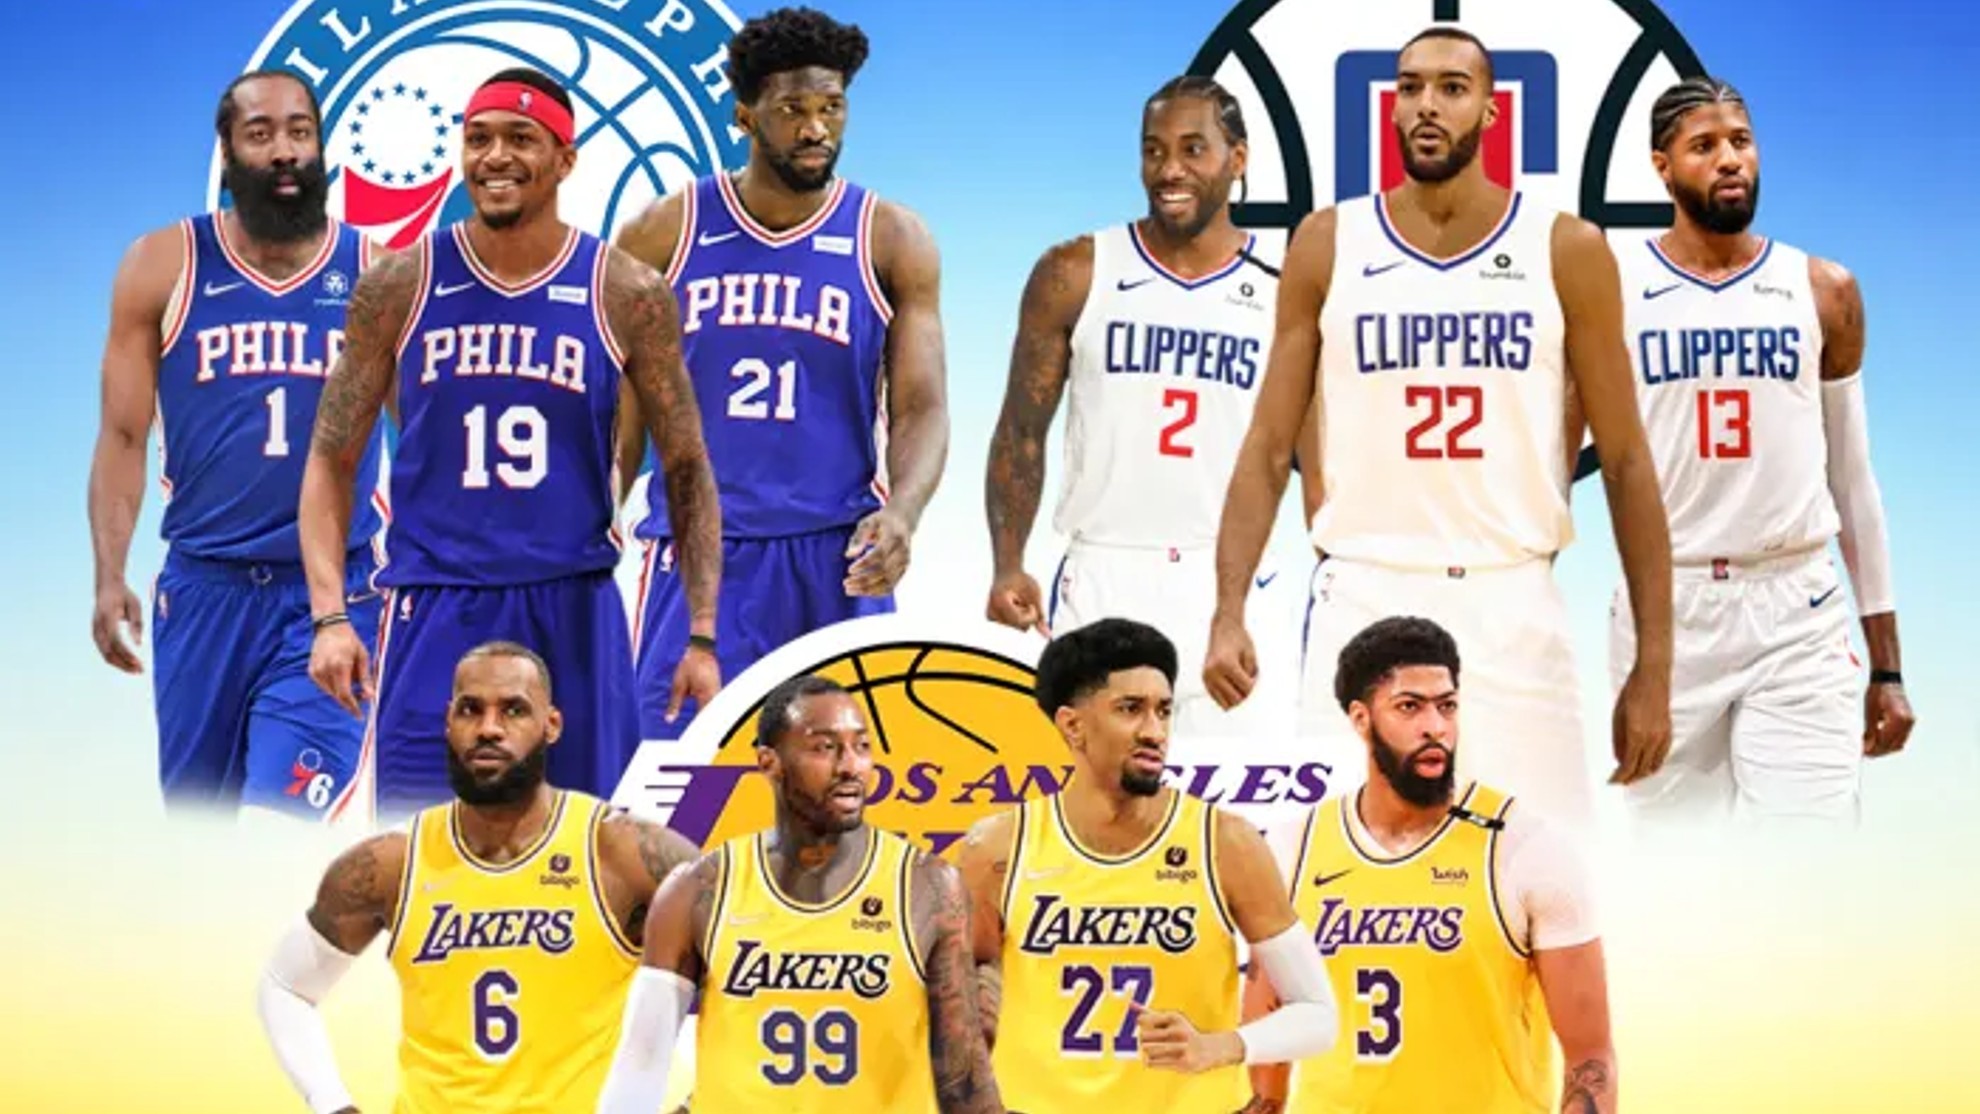 The NBA super teams that could be constructed this summer